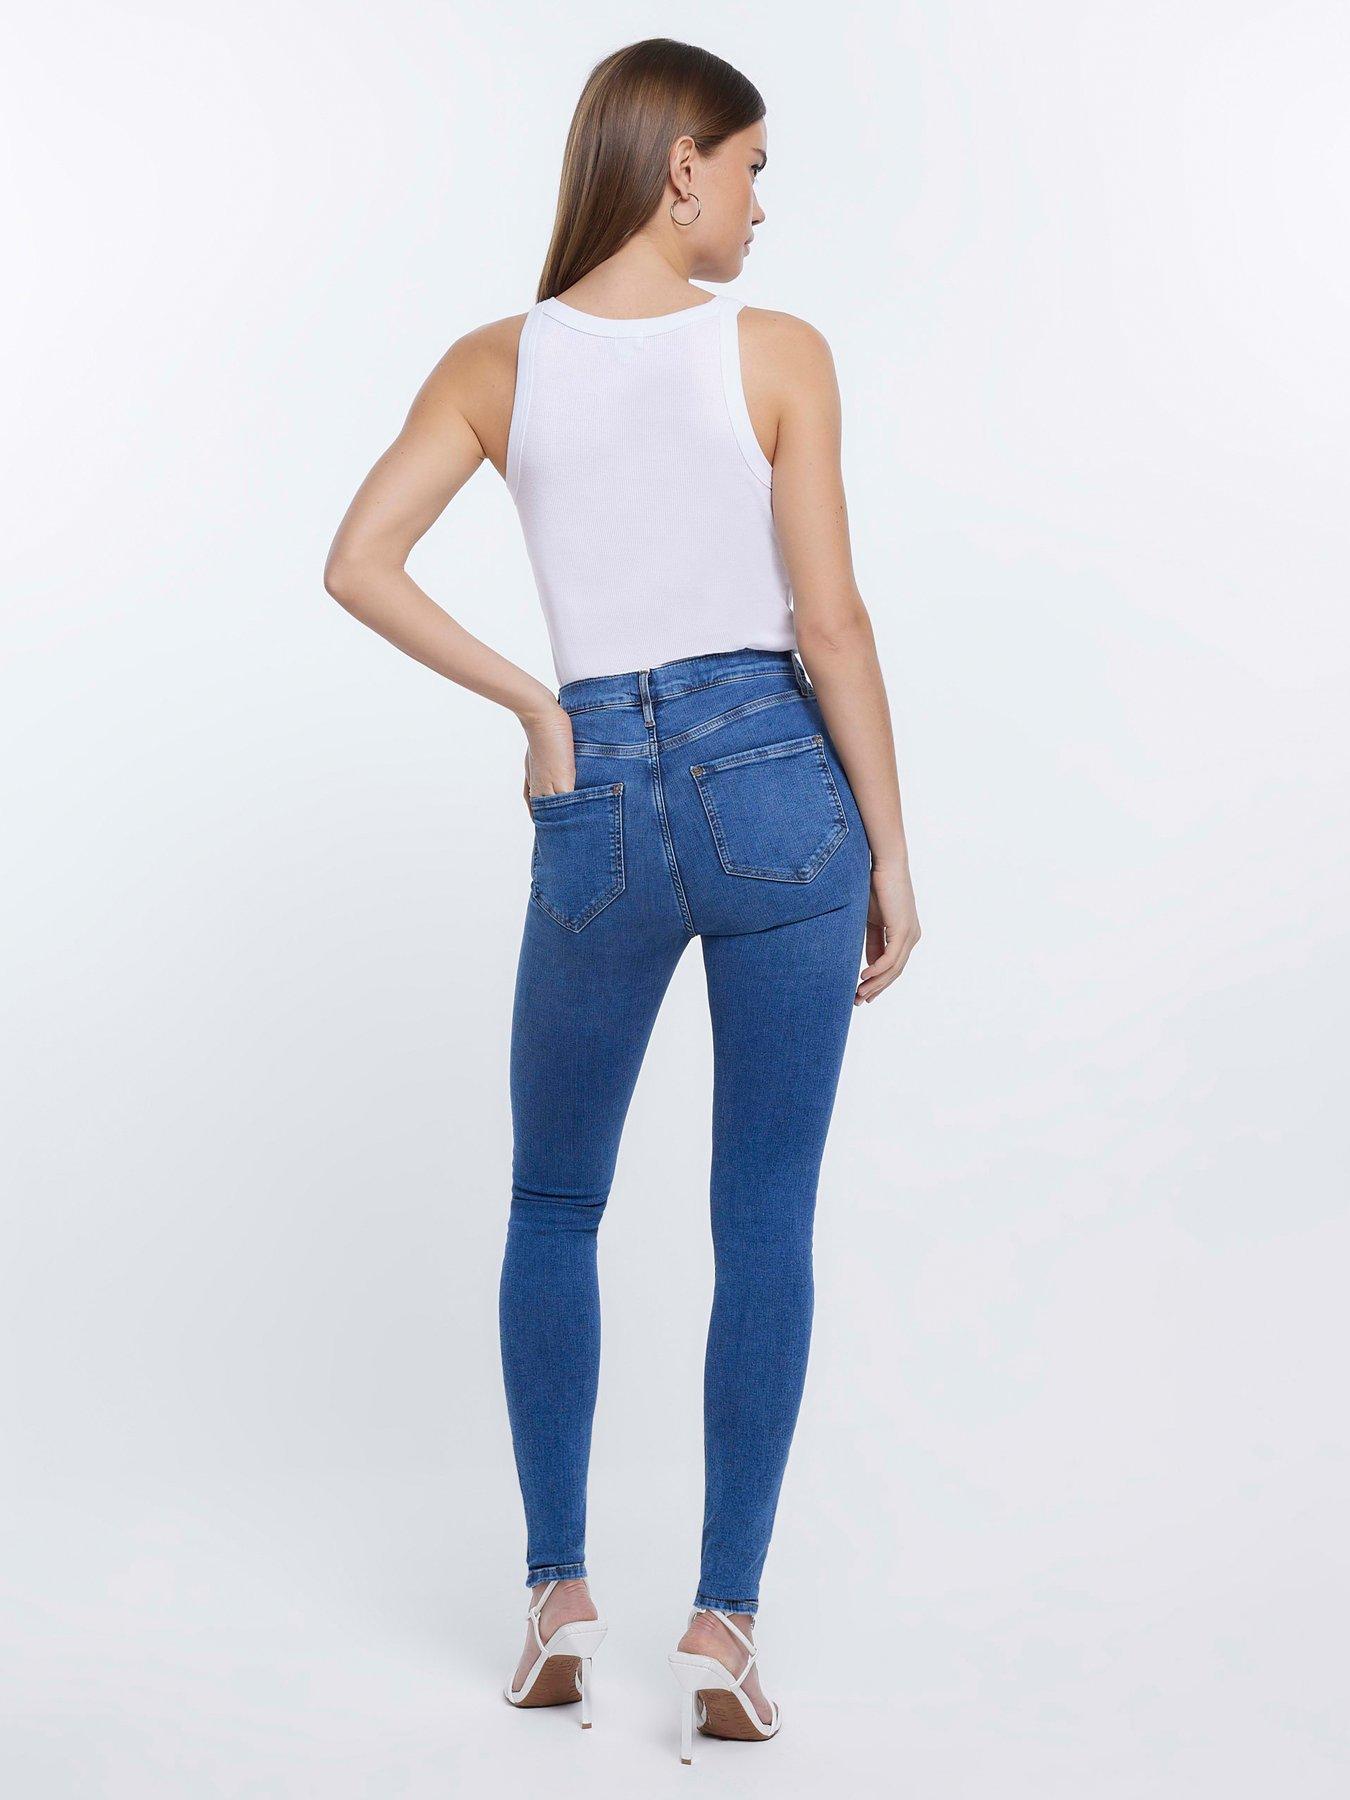 River Island Bright Blue Molly Mid Rise jeggings